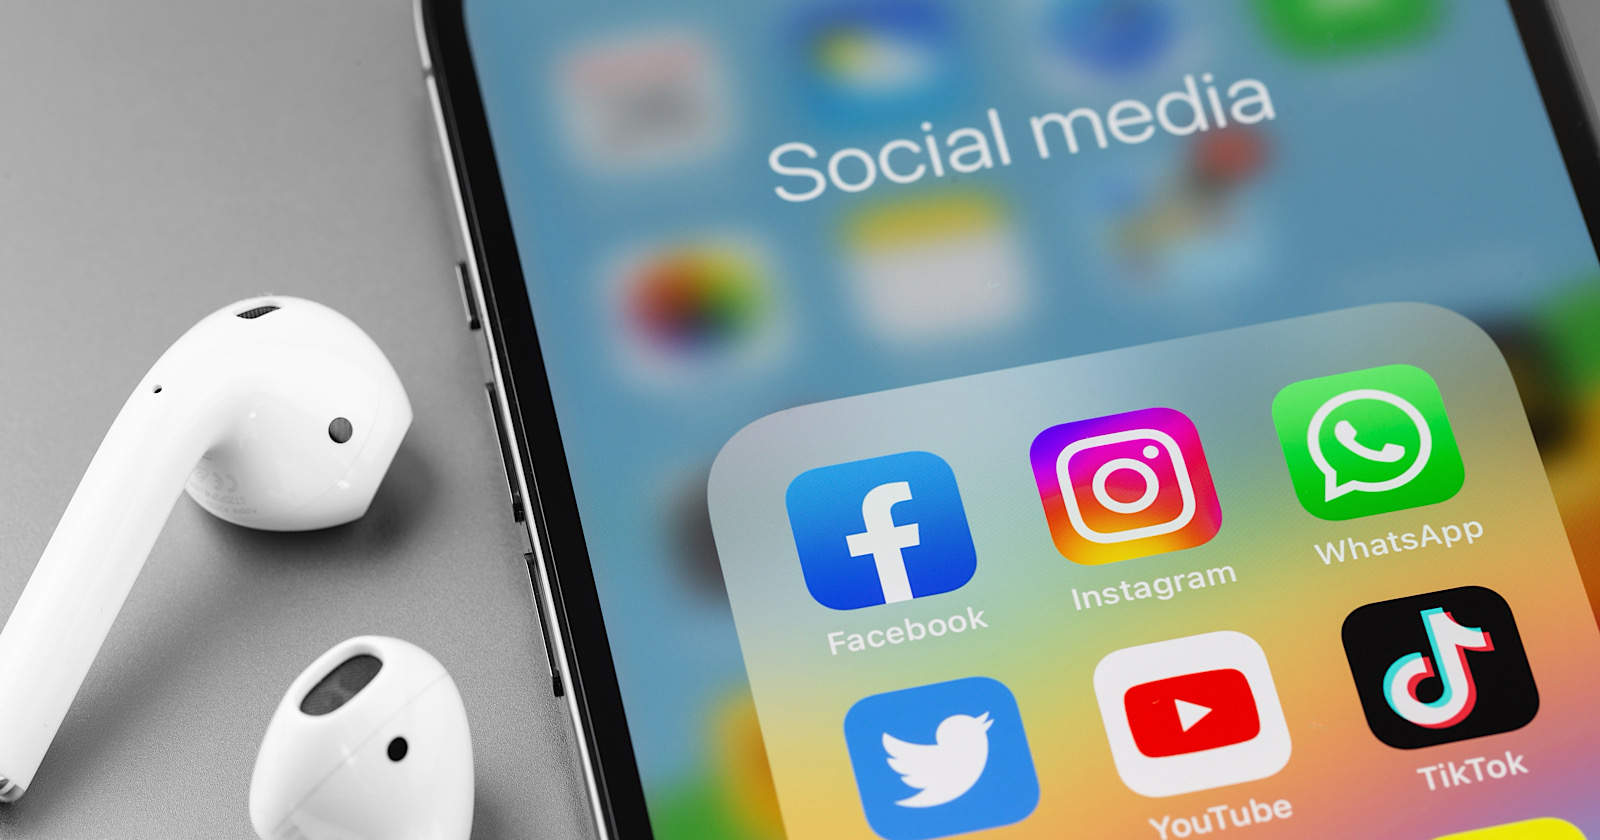 showing social media apps icons of Facebook, Instagram, WhatsApp, Twitter, Youtube, TikTok - on screen smartphone iPhone with AirPods closeup.